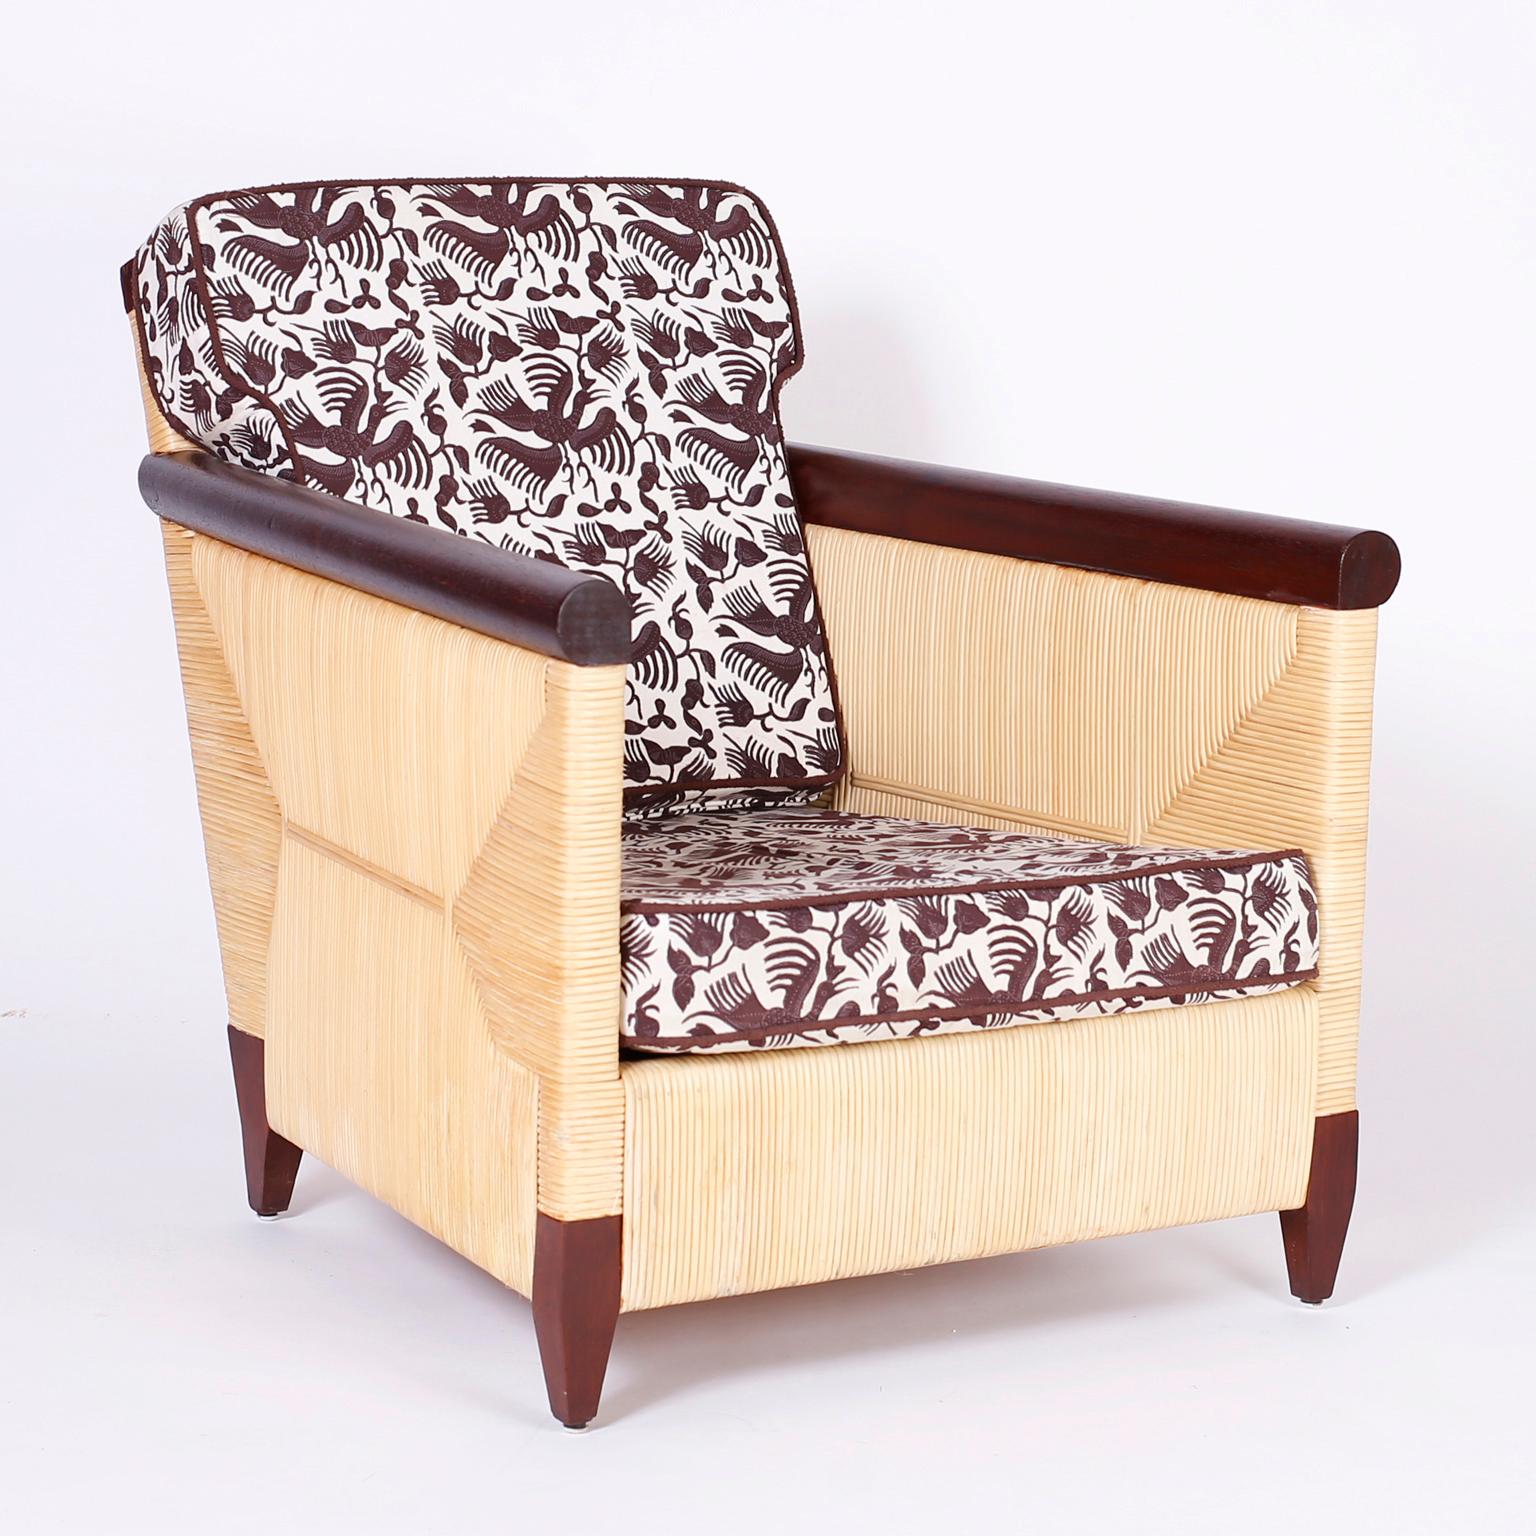 Pair of Donghia lounge chairs designed by John Hutton with a sleek modern interpretation of a British Colonial chair featuring a reed wrapped frame highlighted by mahogany arms and feet. Signed Donghia at the bottom.